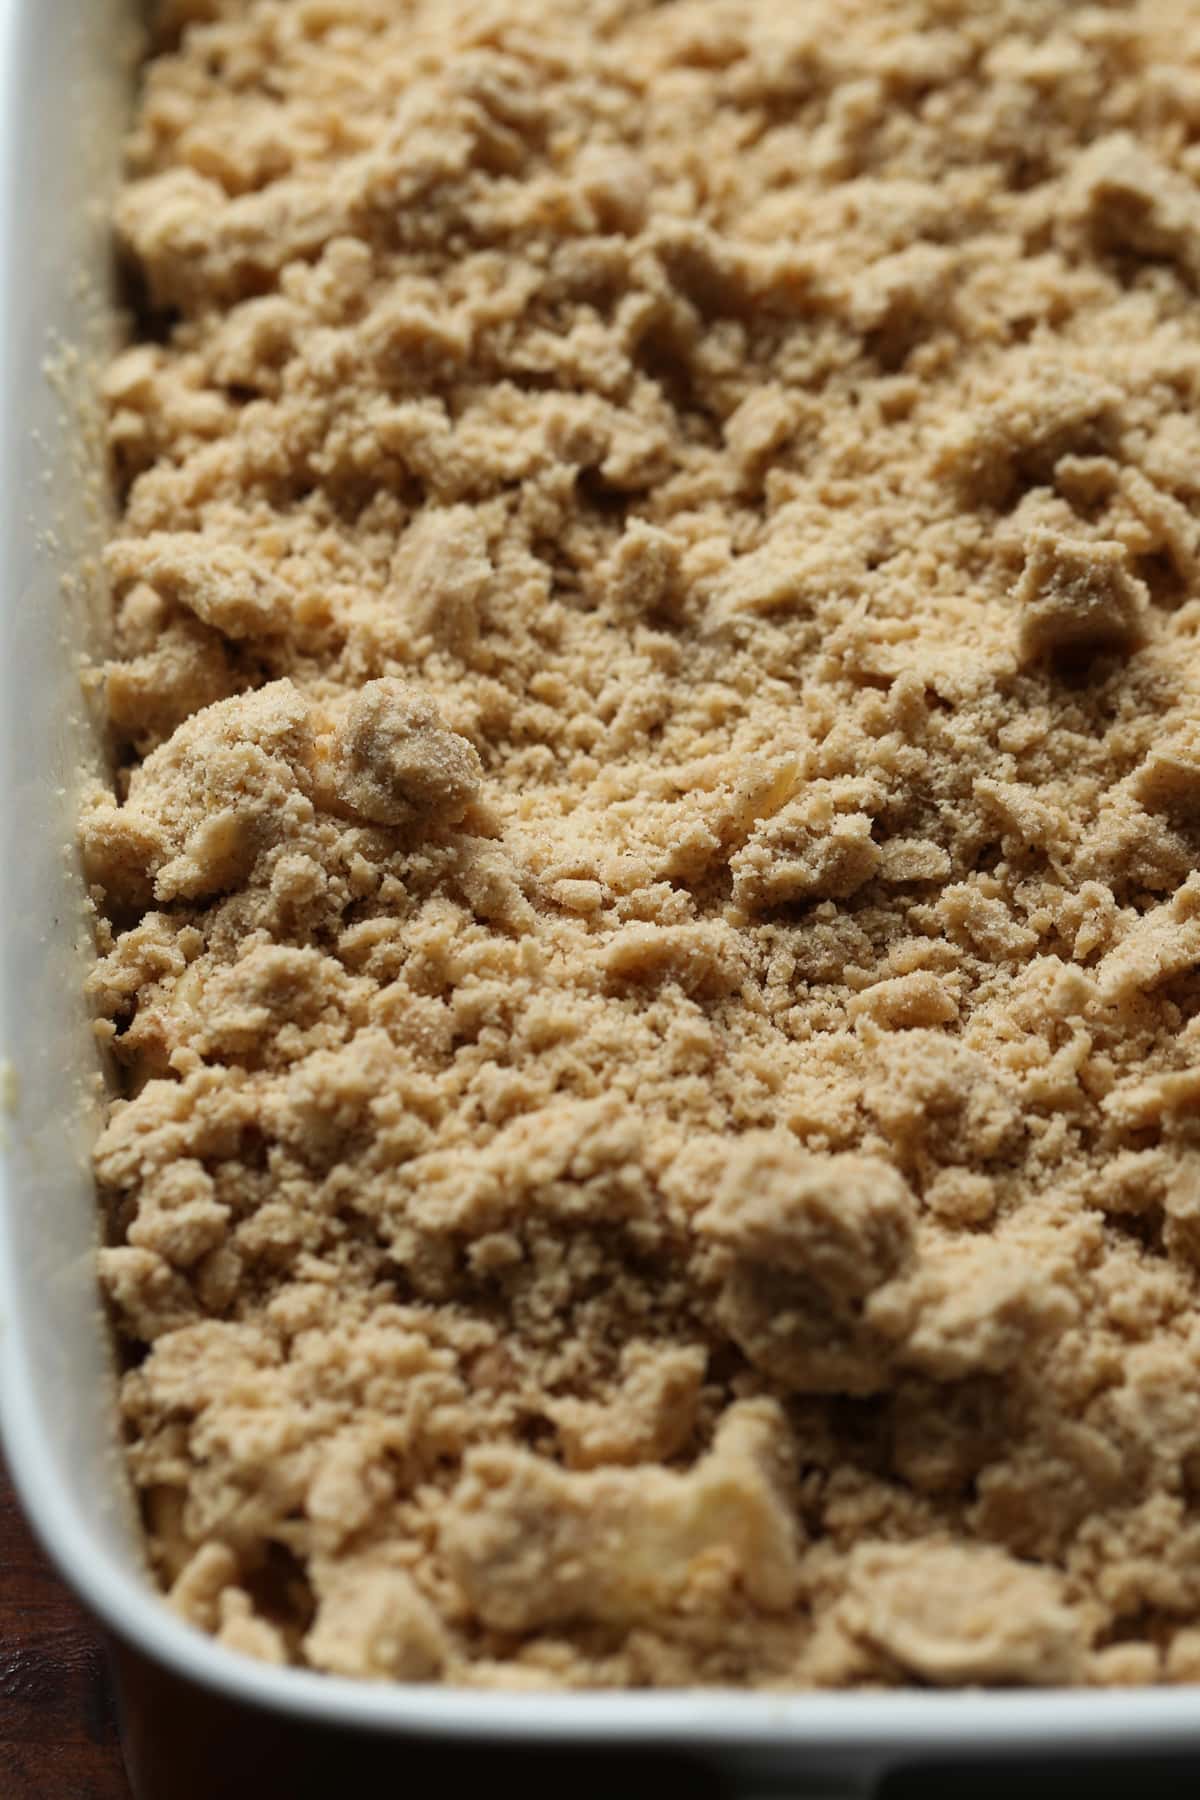 Crumb topping on top of coffee cake batter in a 9x13 baking dish before going into the oven.